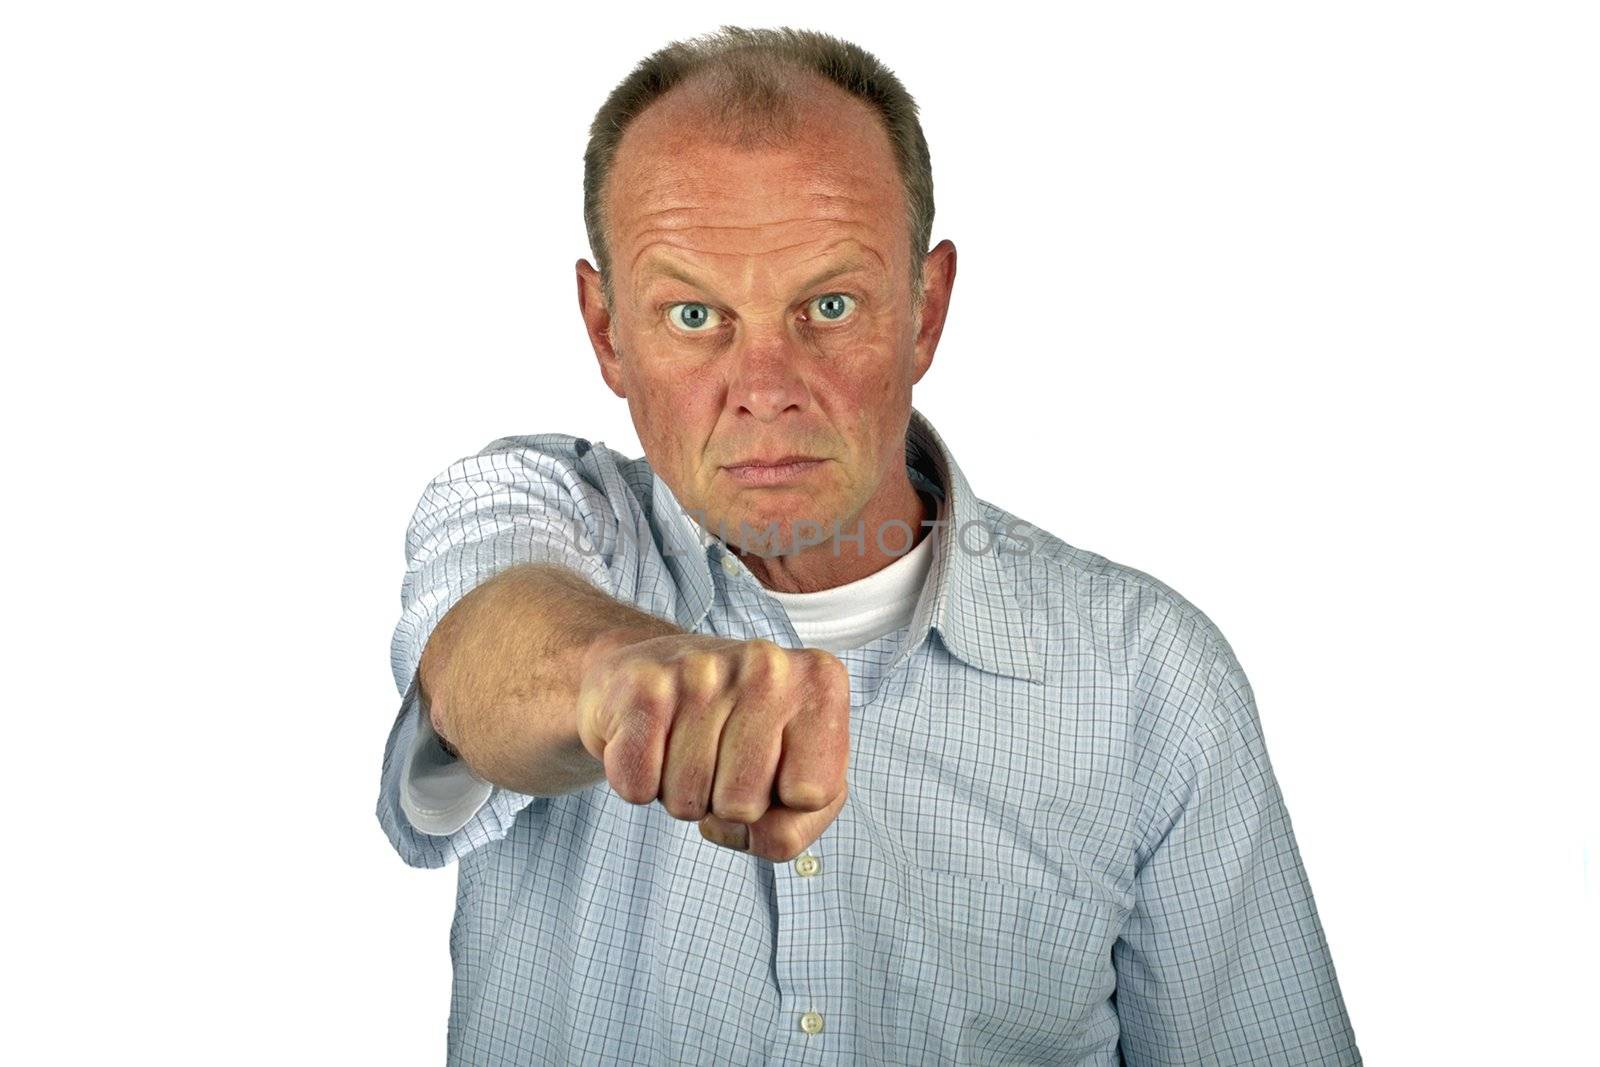 Aggressive man showing his fist on a white background